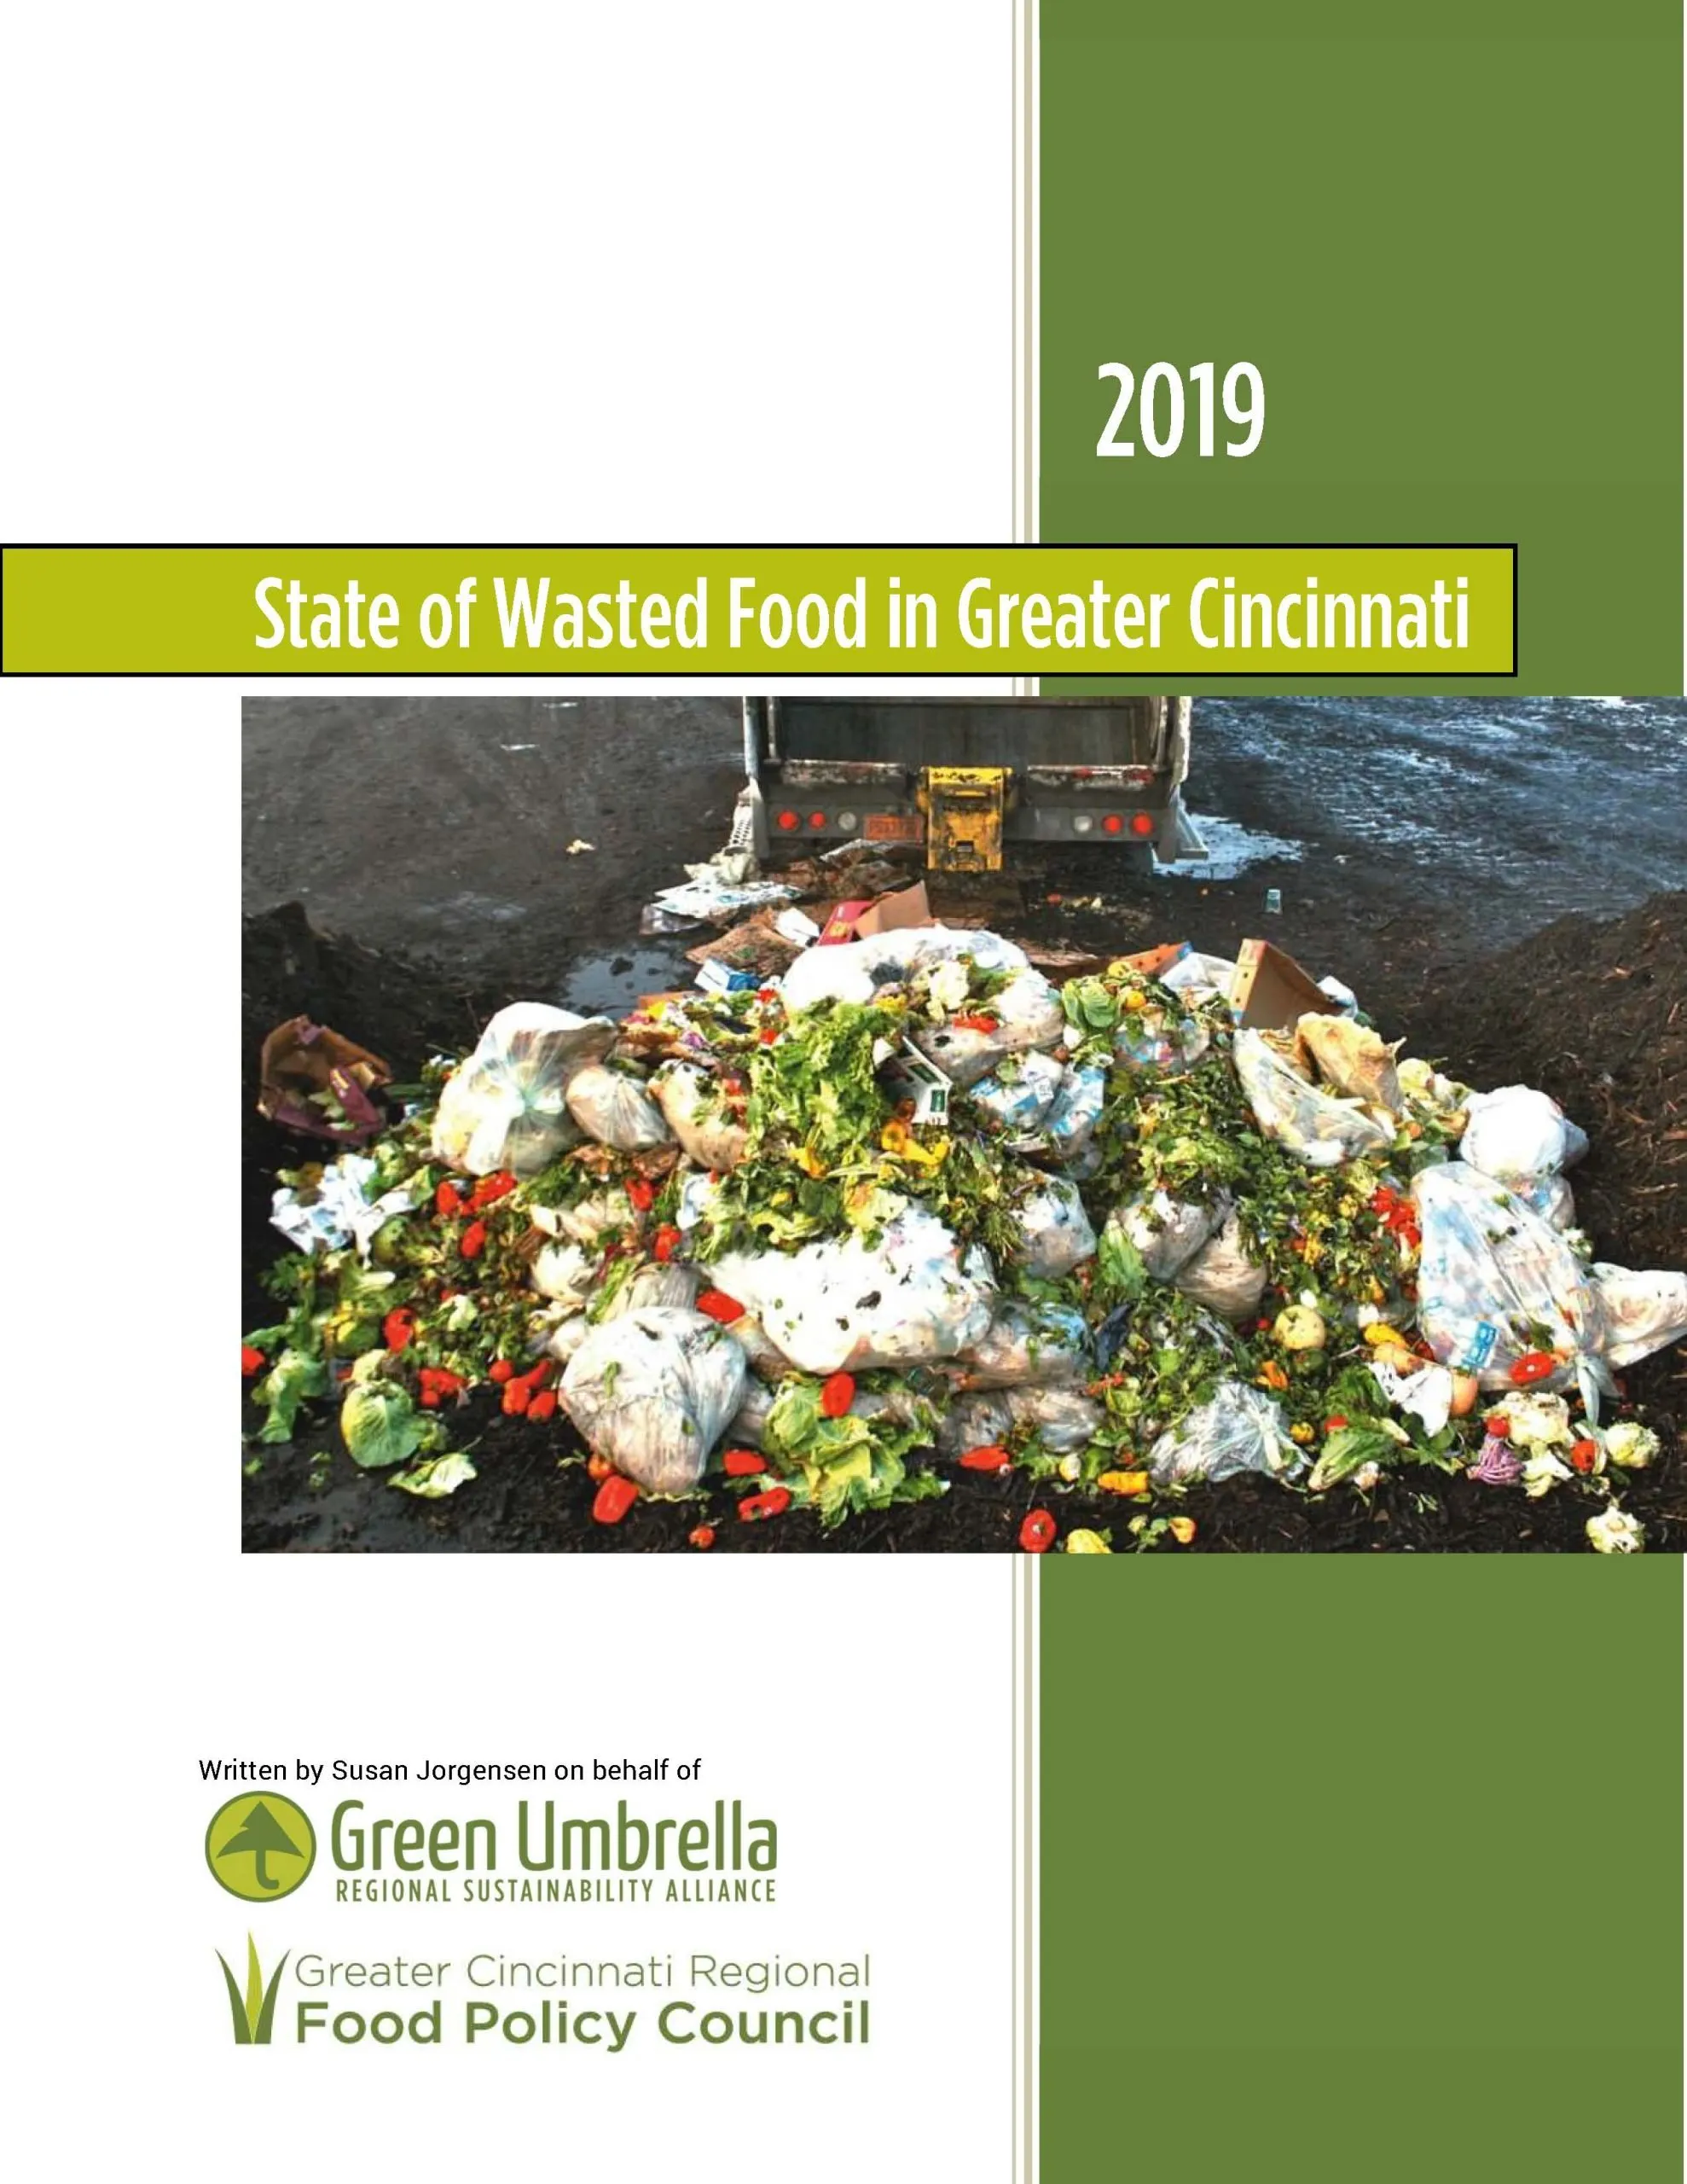 State of Wasted Food in Greater Cincinnati (2019)